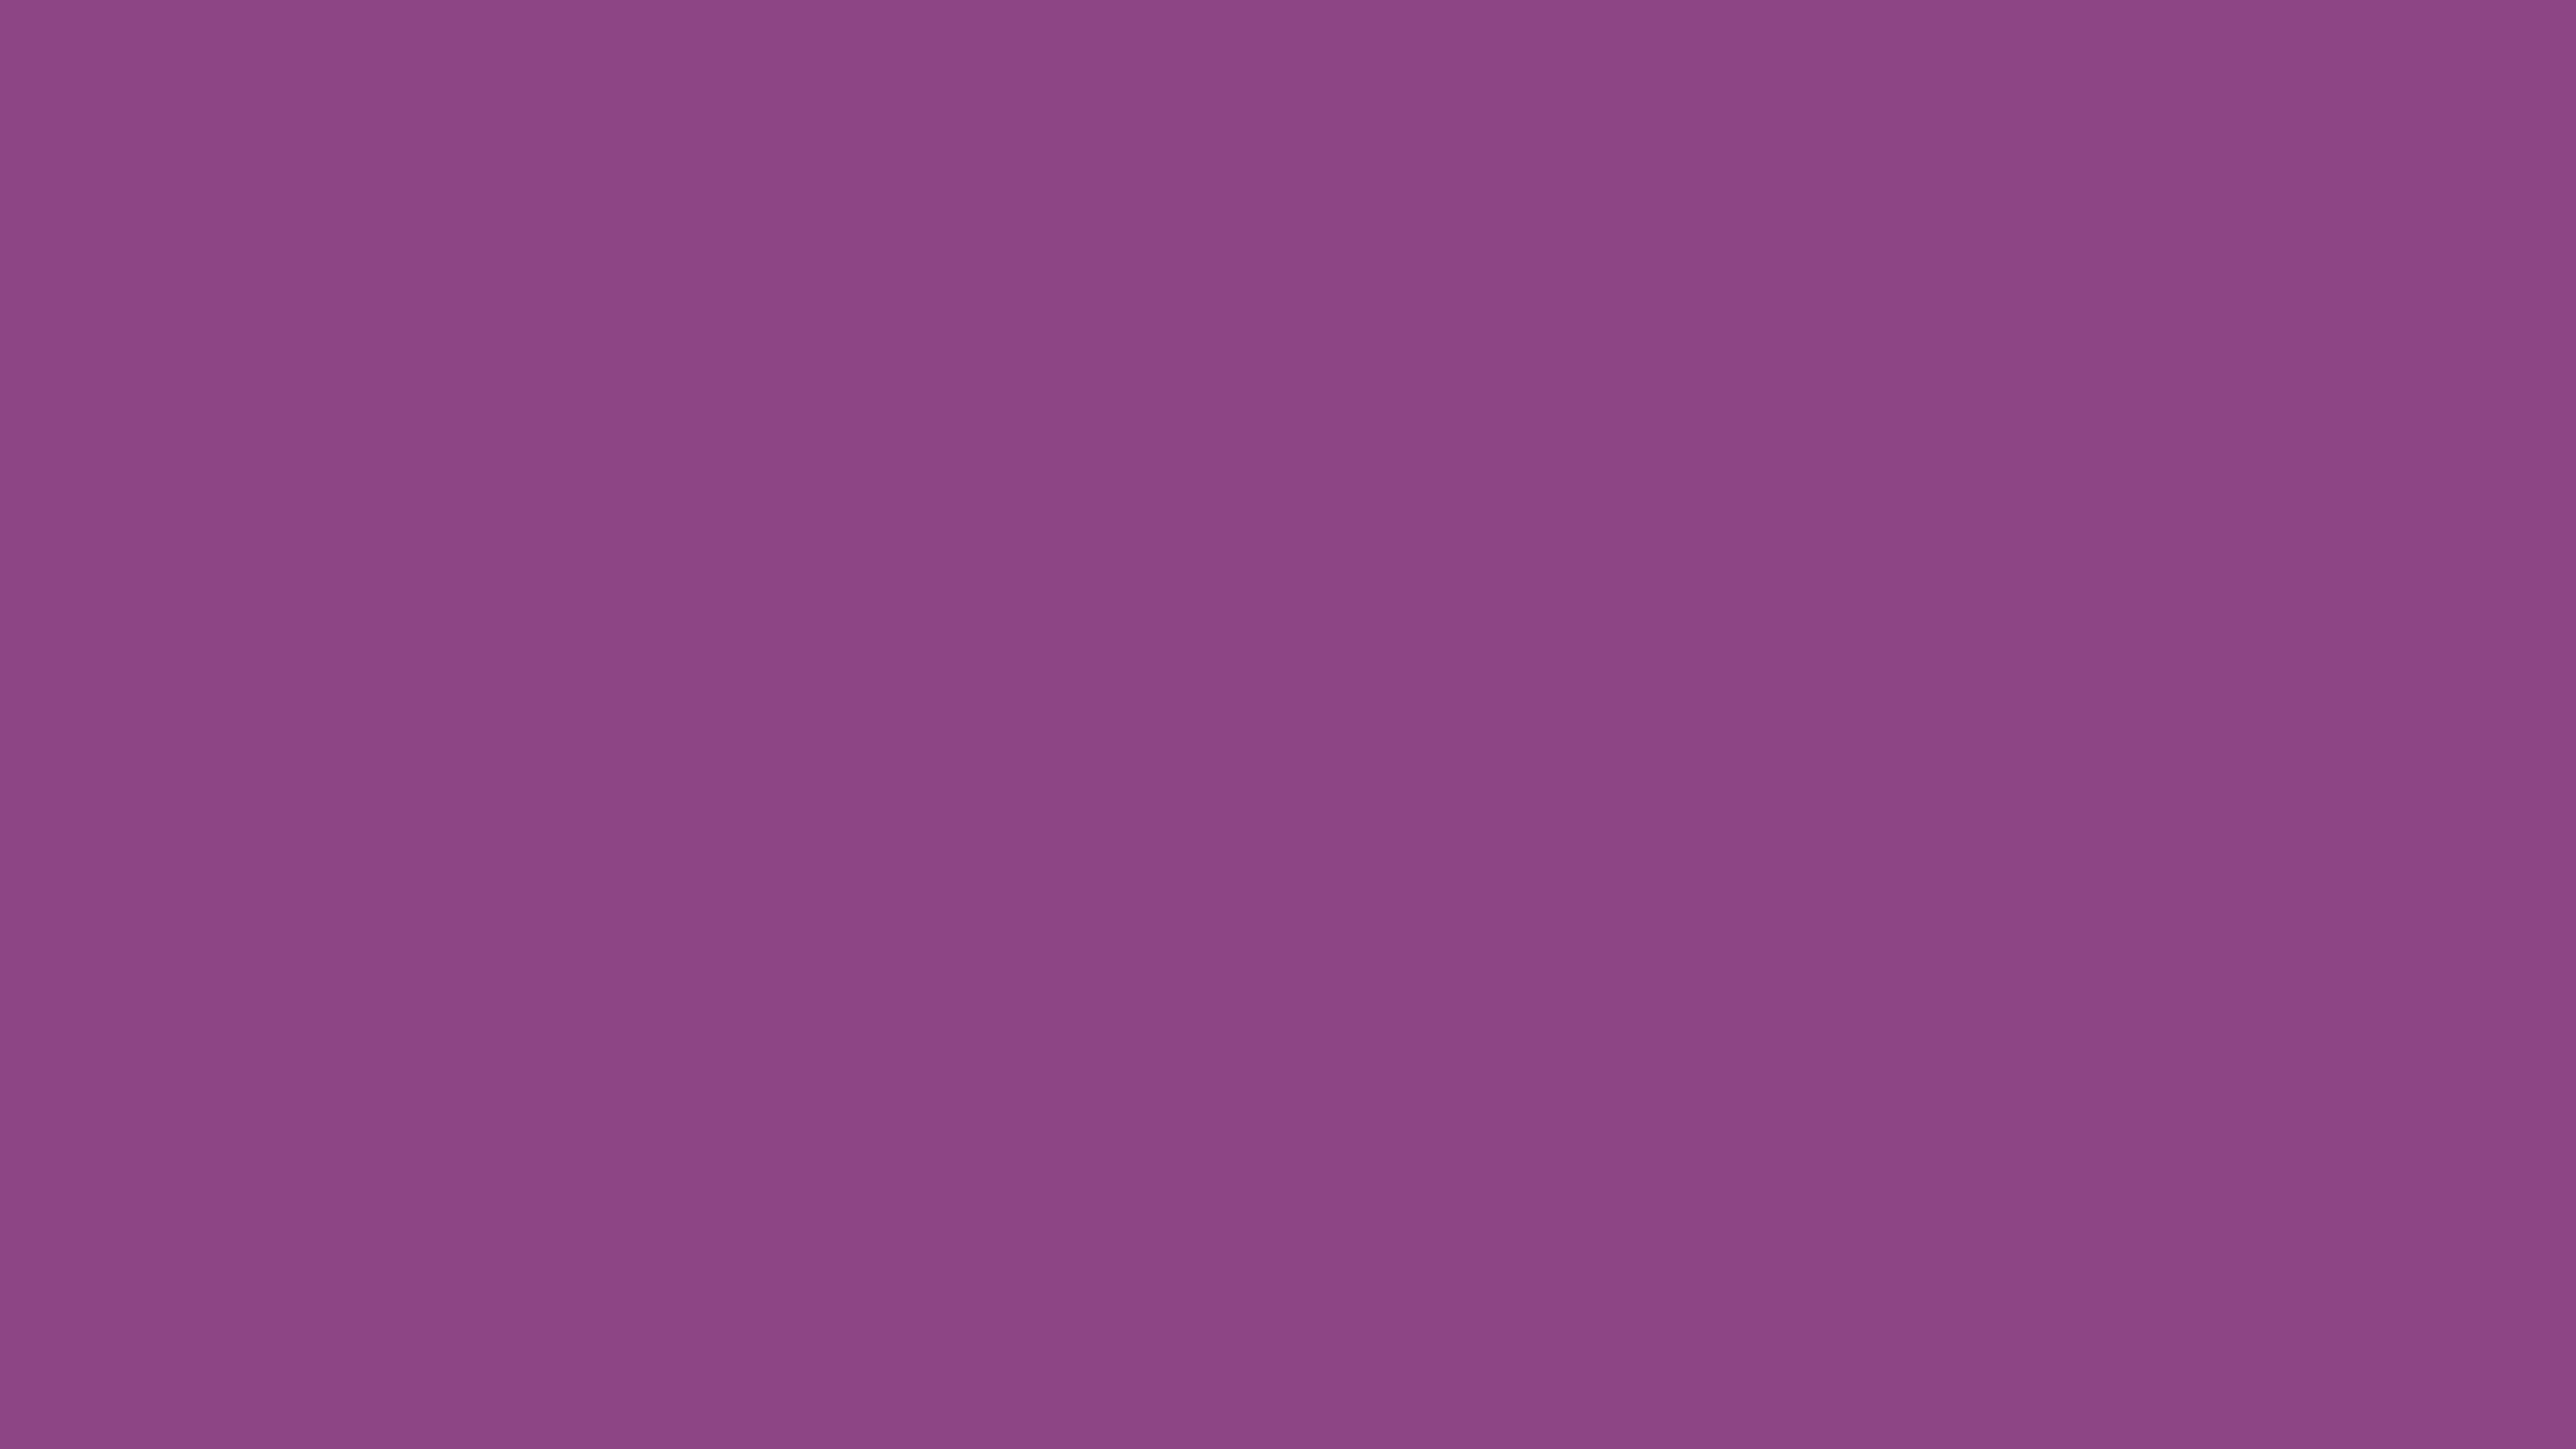 3840x2160 Plum Traditional Solid Color Background